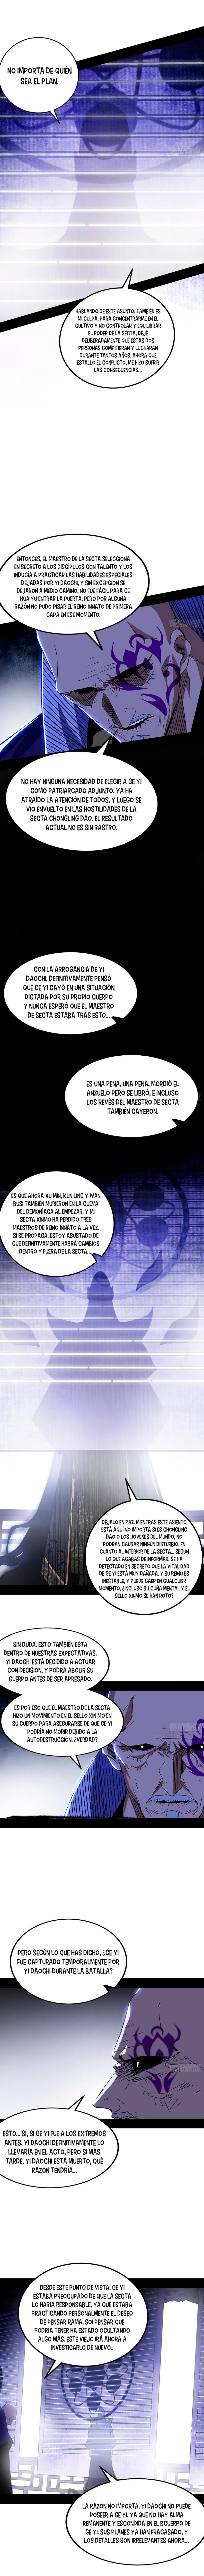 Manga Soy un dios maligno Chapter 318 image number 2